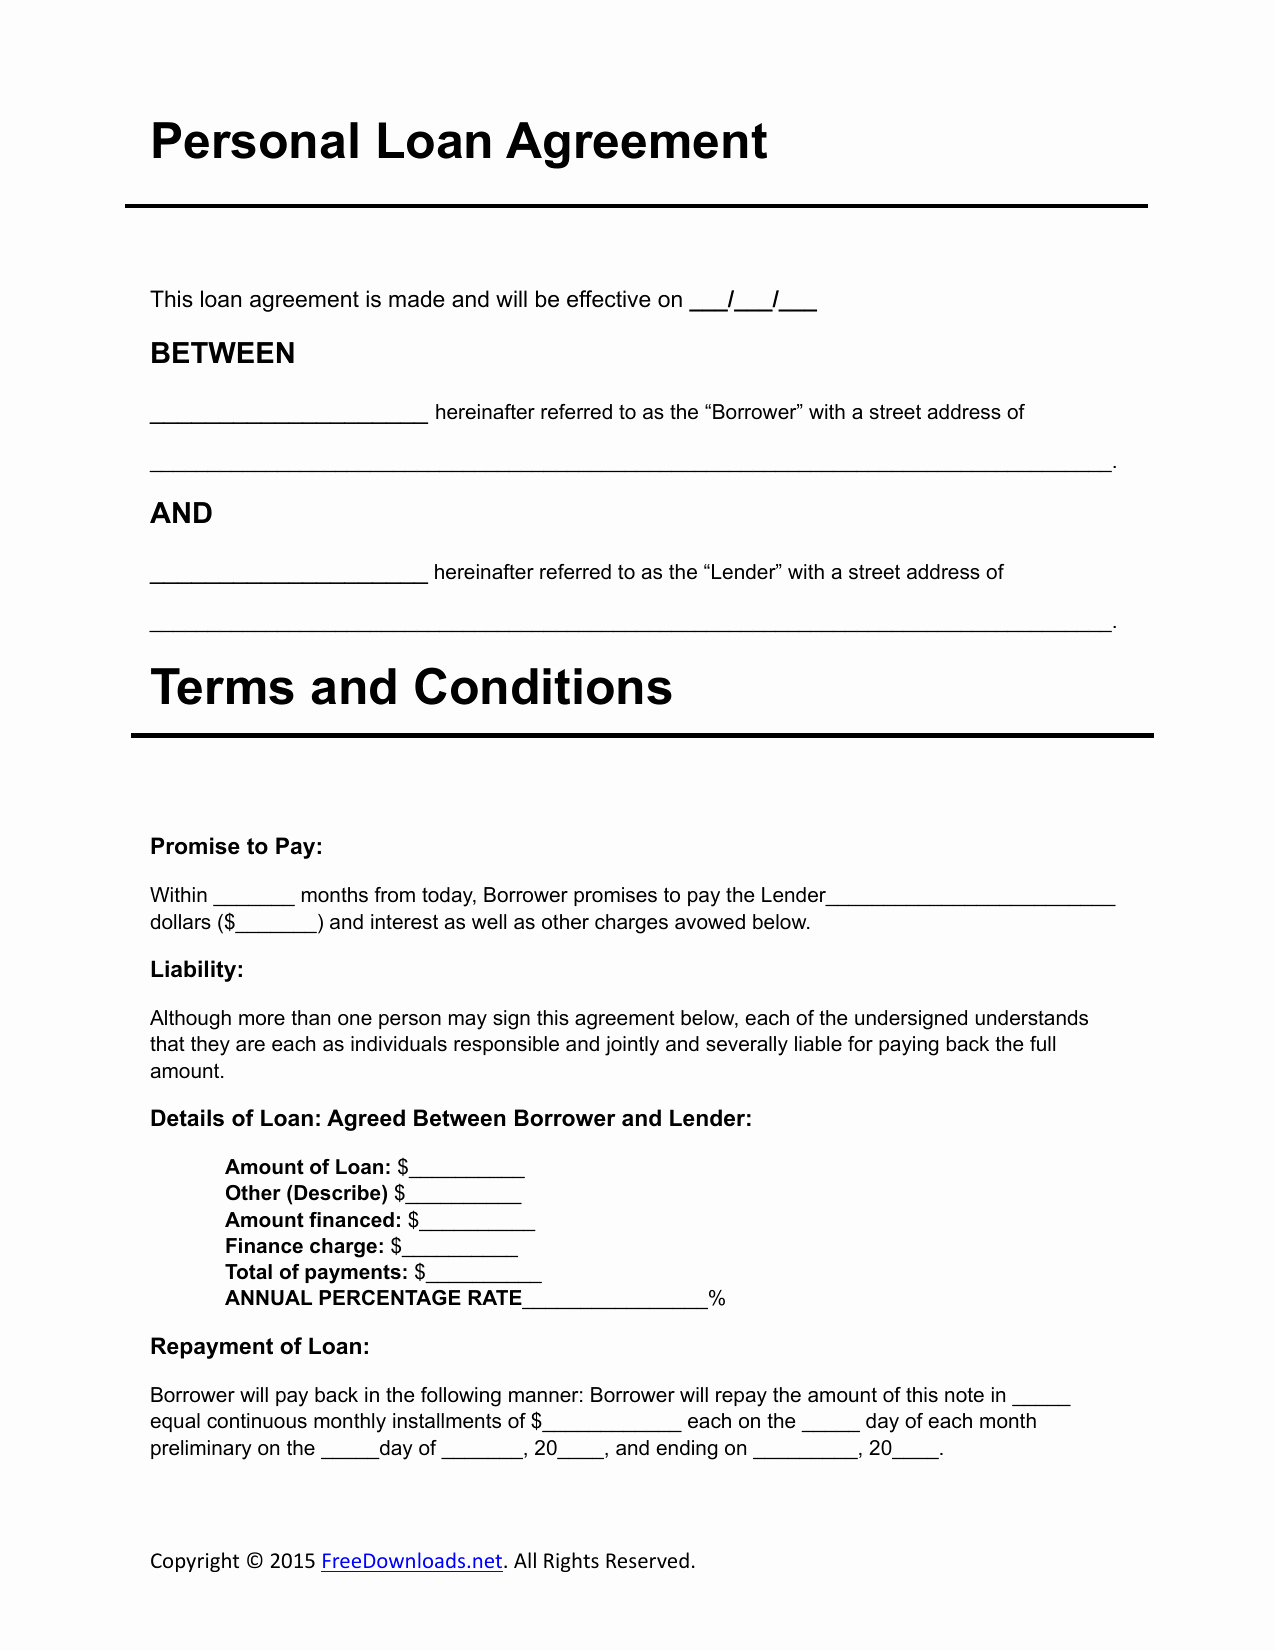 Simple Loan Application form Template New Download Personal Loan Agreement Template Pdf